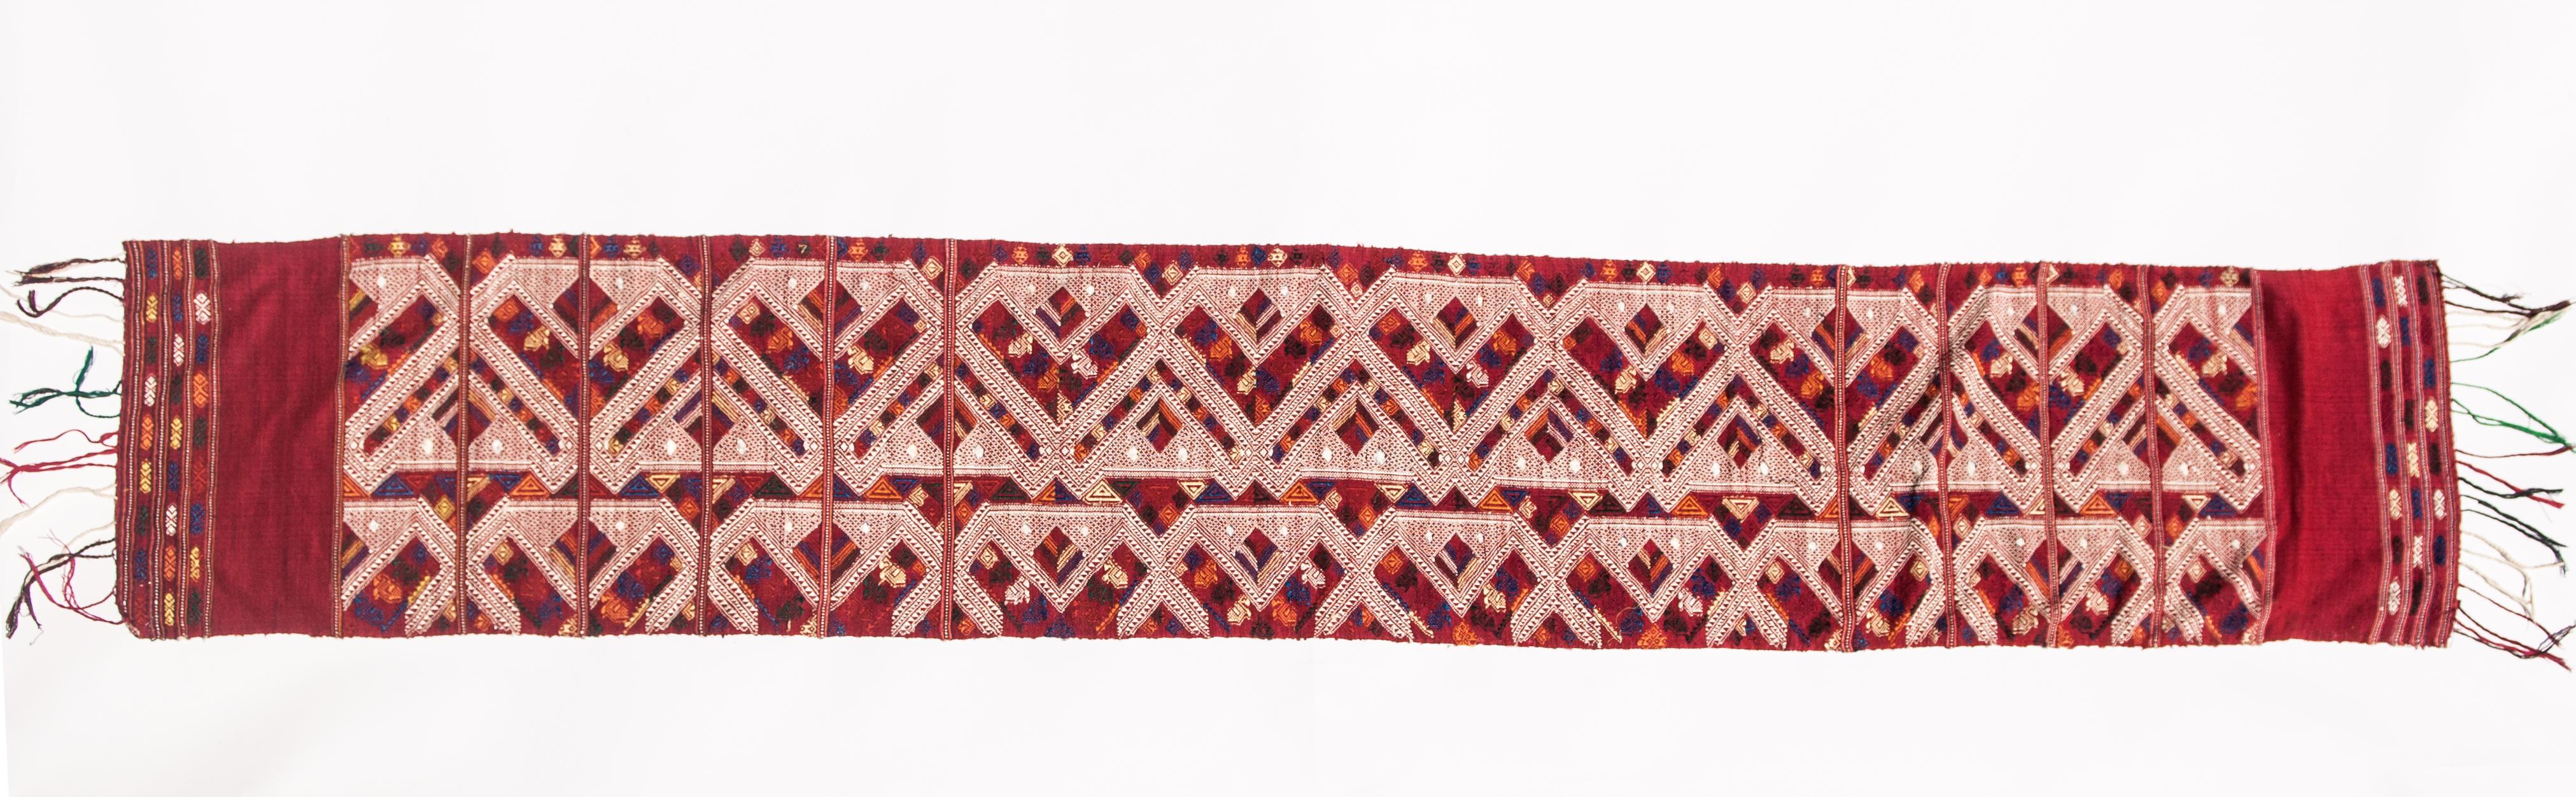 Vintage handwoven silk shoulder cloth supplementary weft Laos, late 20th century
This Pha Biang or shoulder cloth was handwoven in northeast Laos utilizing a traditional supplementary weft technique.
Condition: The piece is in good